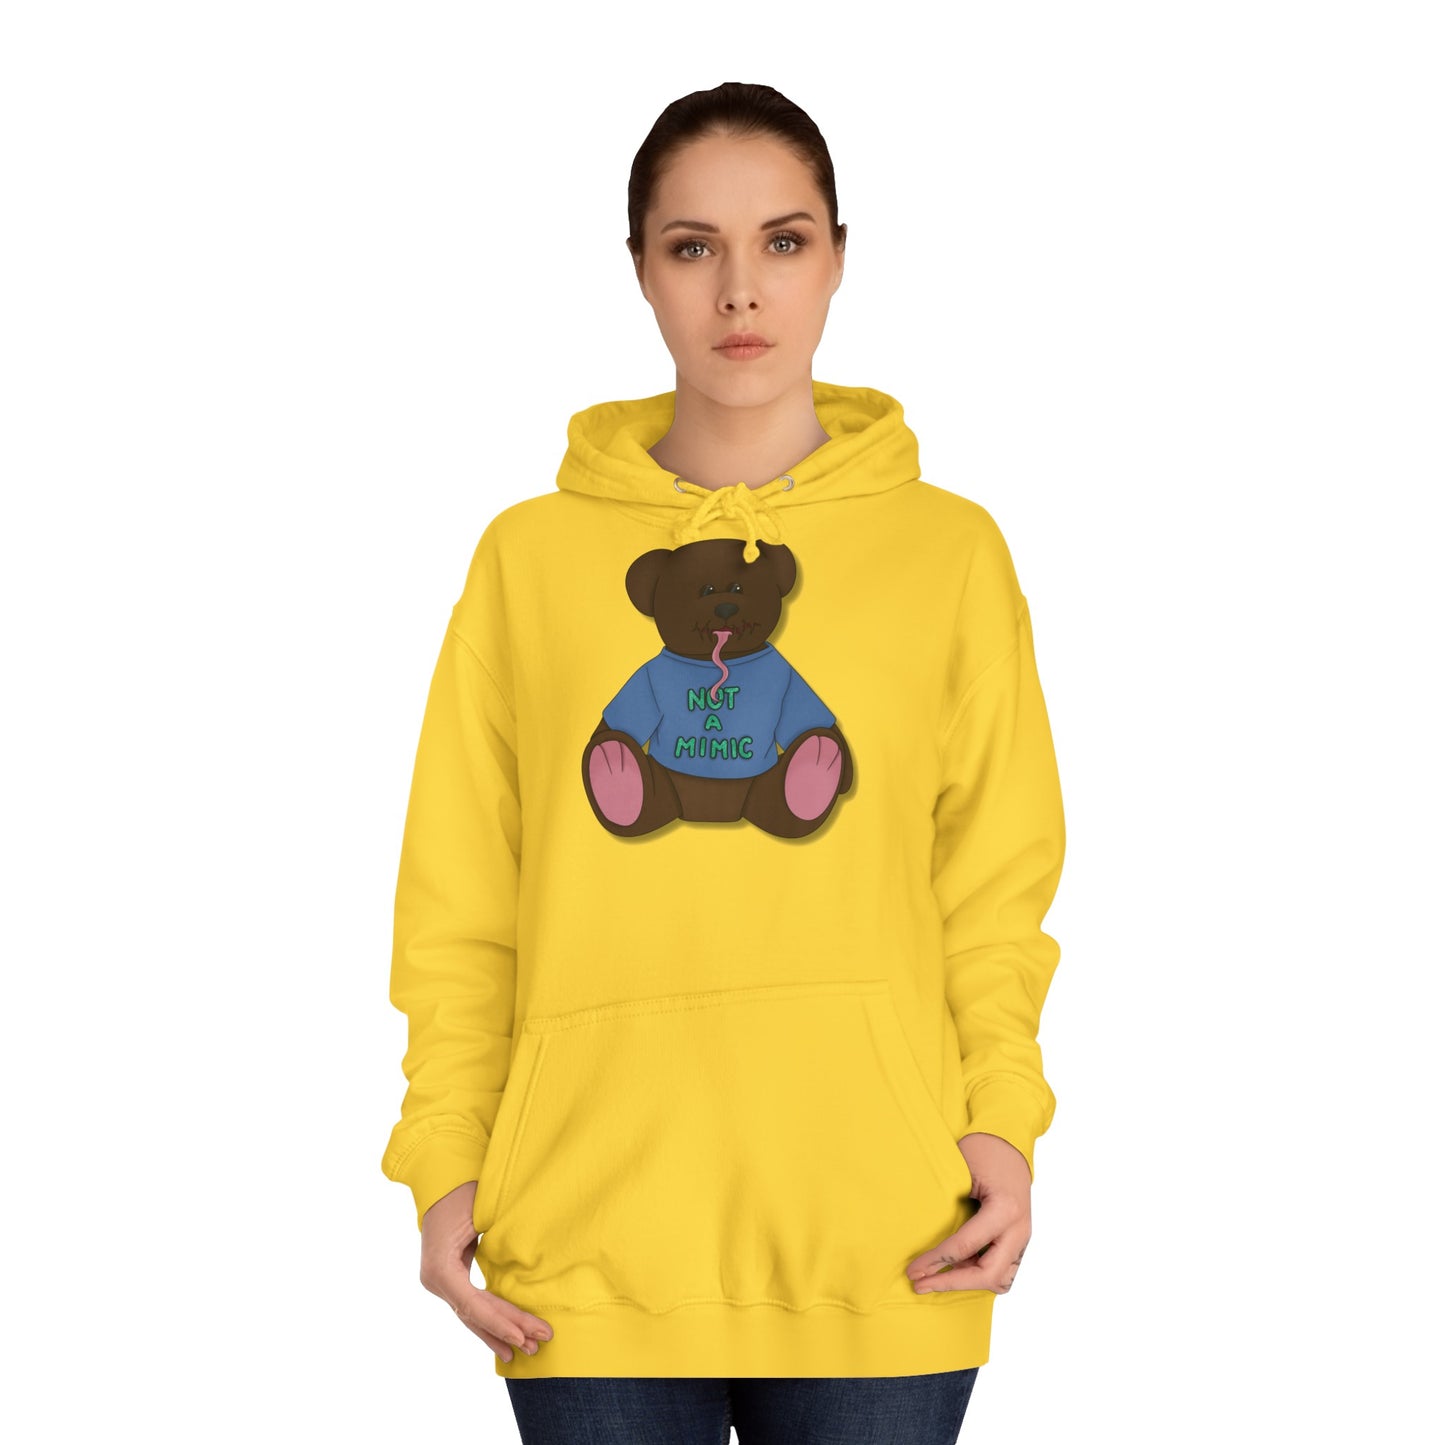 (Not a) Mimic Unisex College Hoodie